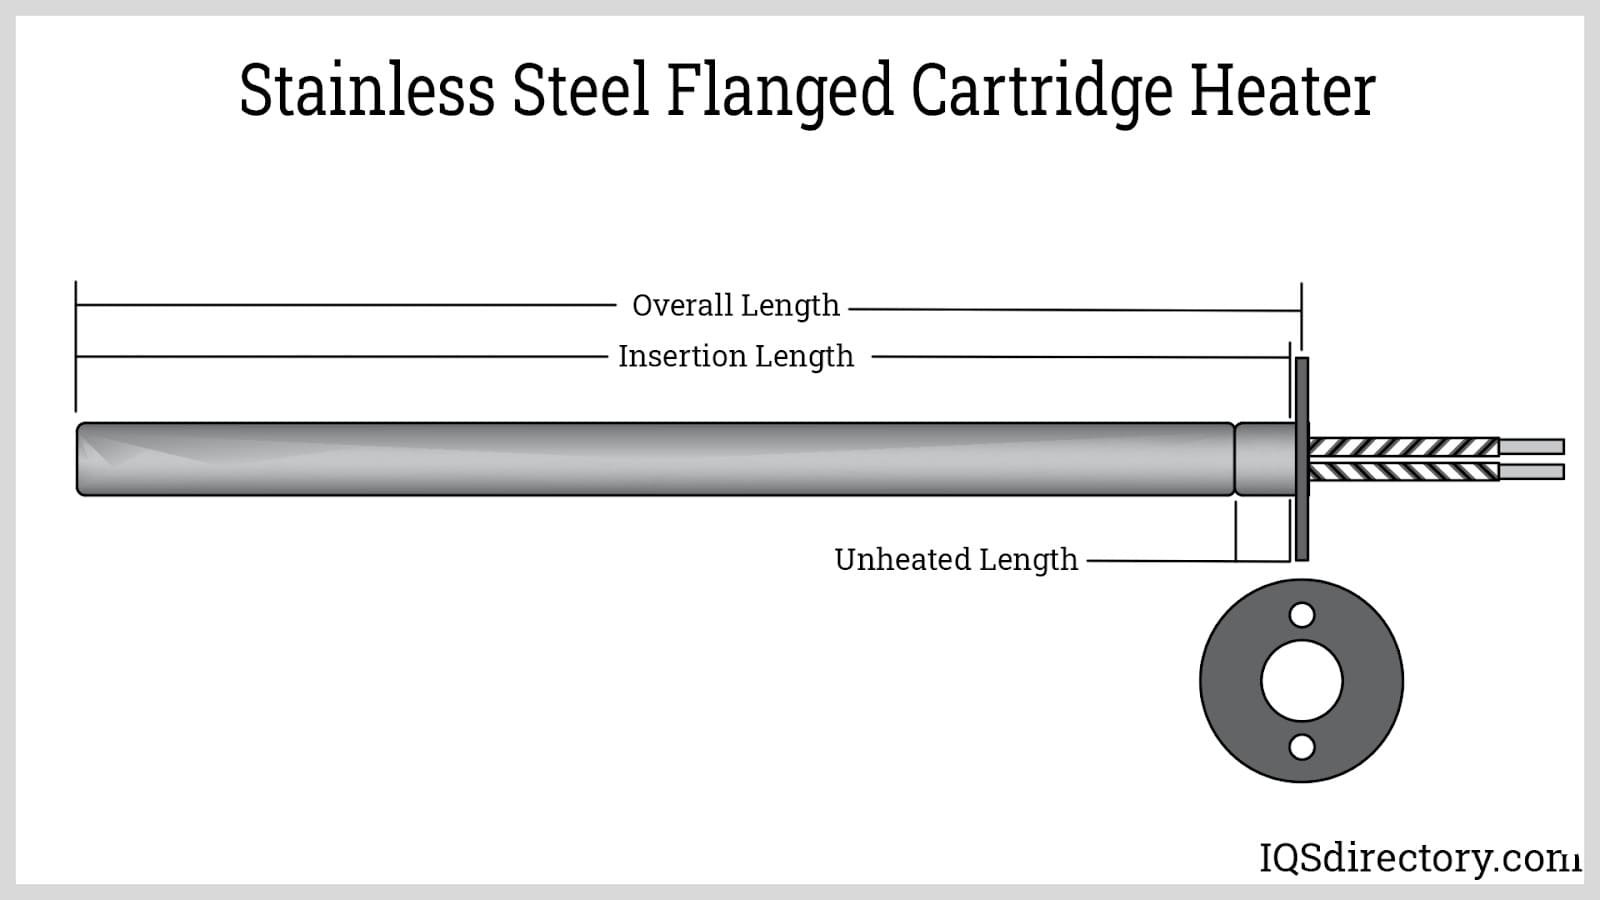 Stainless Steel Flanged Cartridge Heater